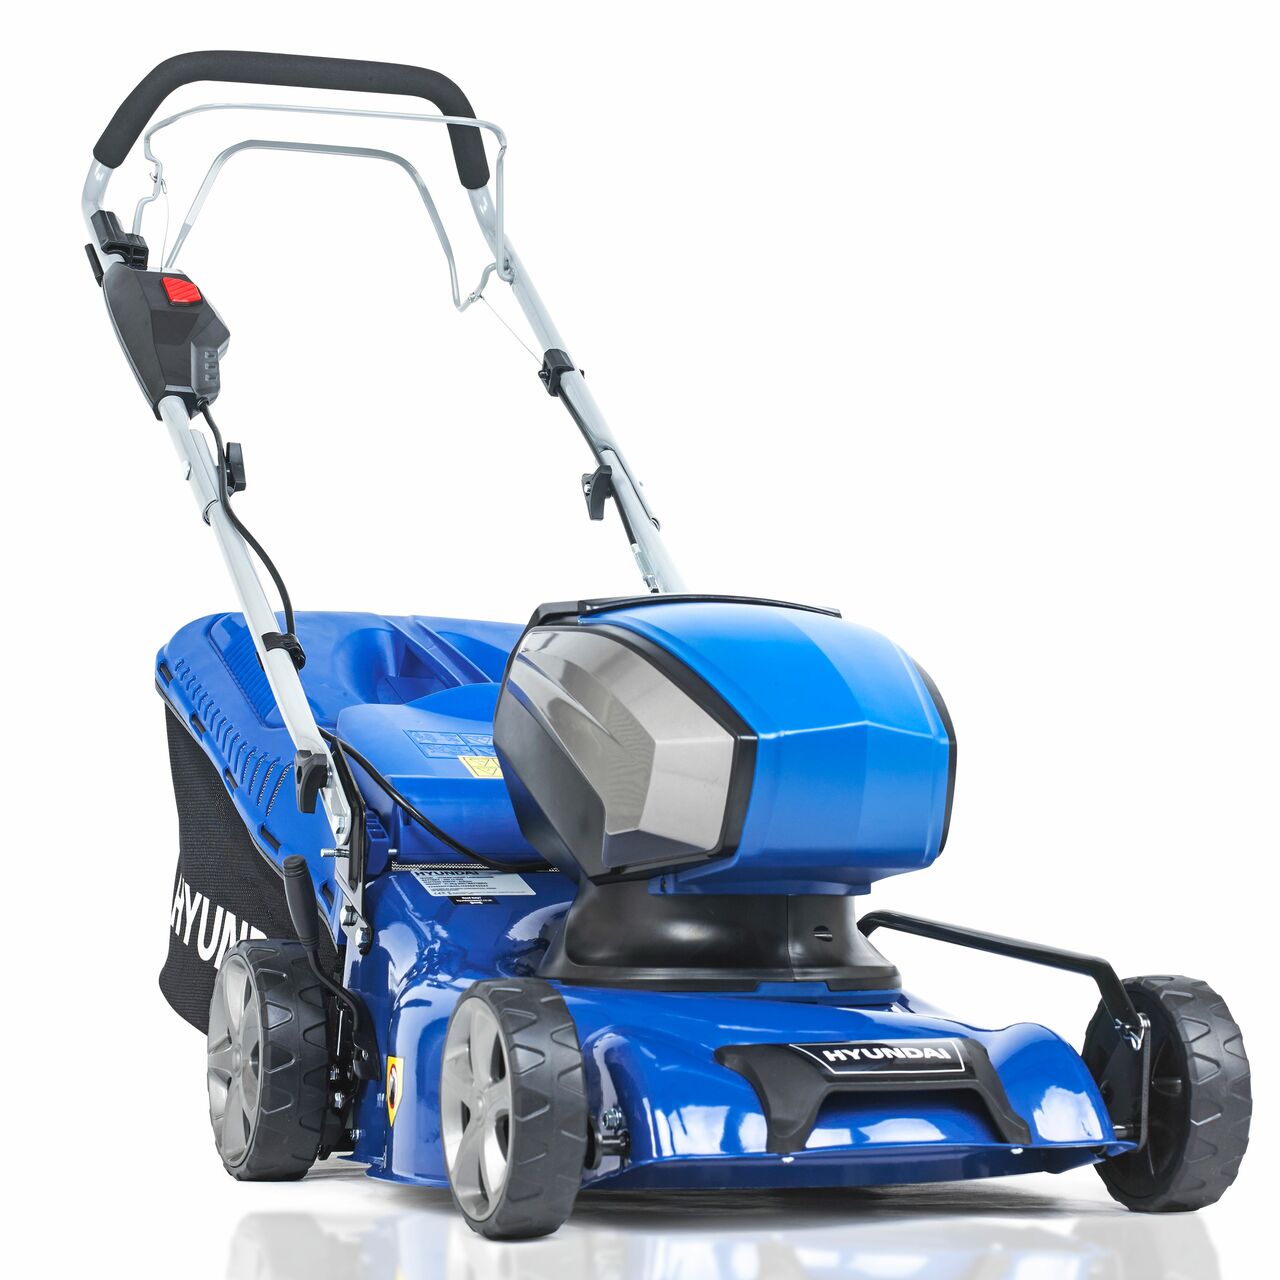 Hyundai-HYM40LI420SP-42cm-Cordless-40v-Lithium-Ion-Battery-Self-Propelled-Lawnmower-with-Battery-and-Charger